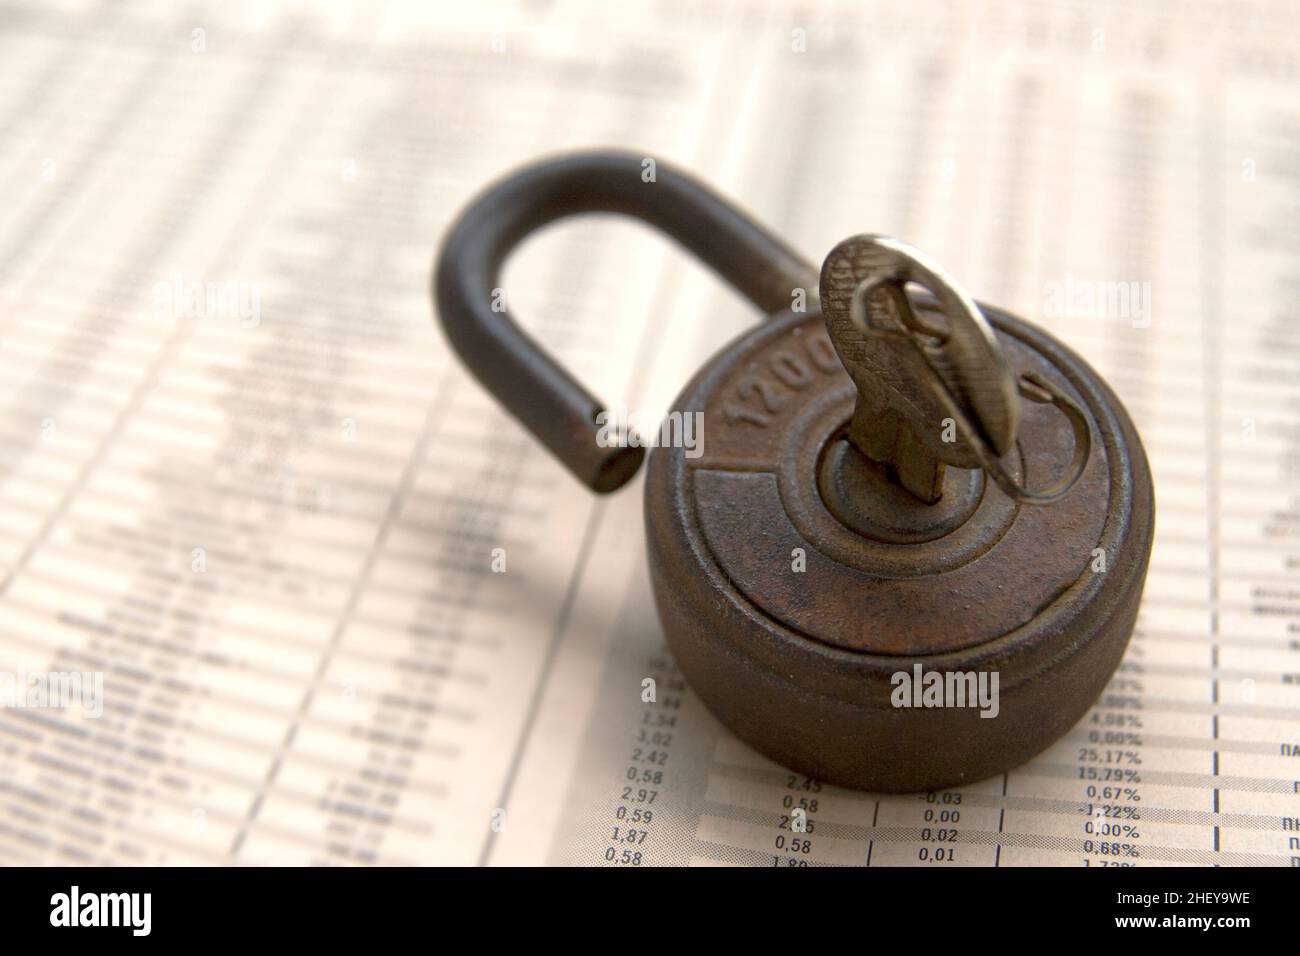 Economy newspaper with an old rusty padlock on it Stock Photo